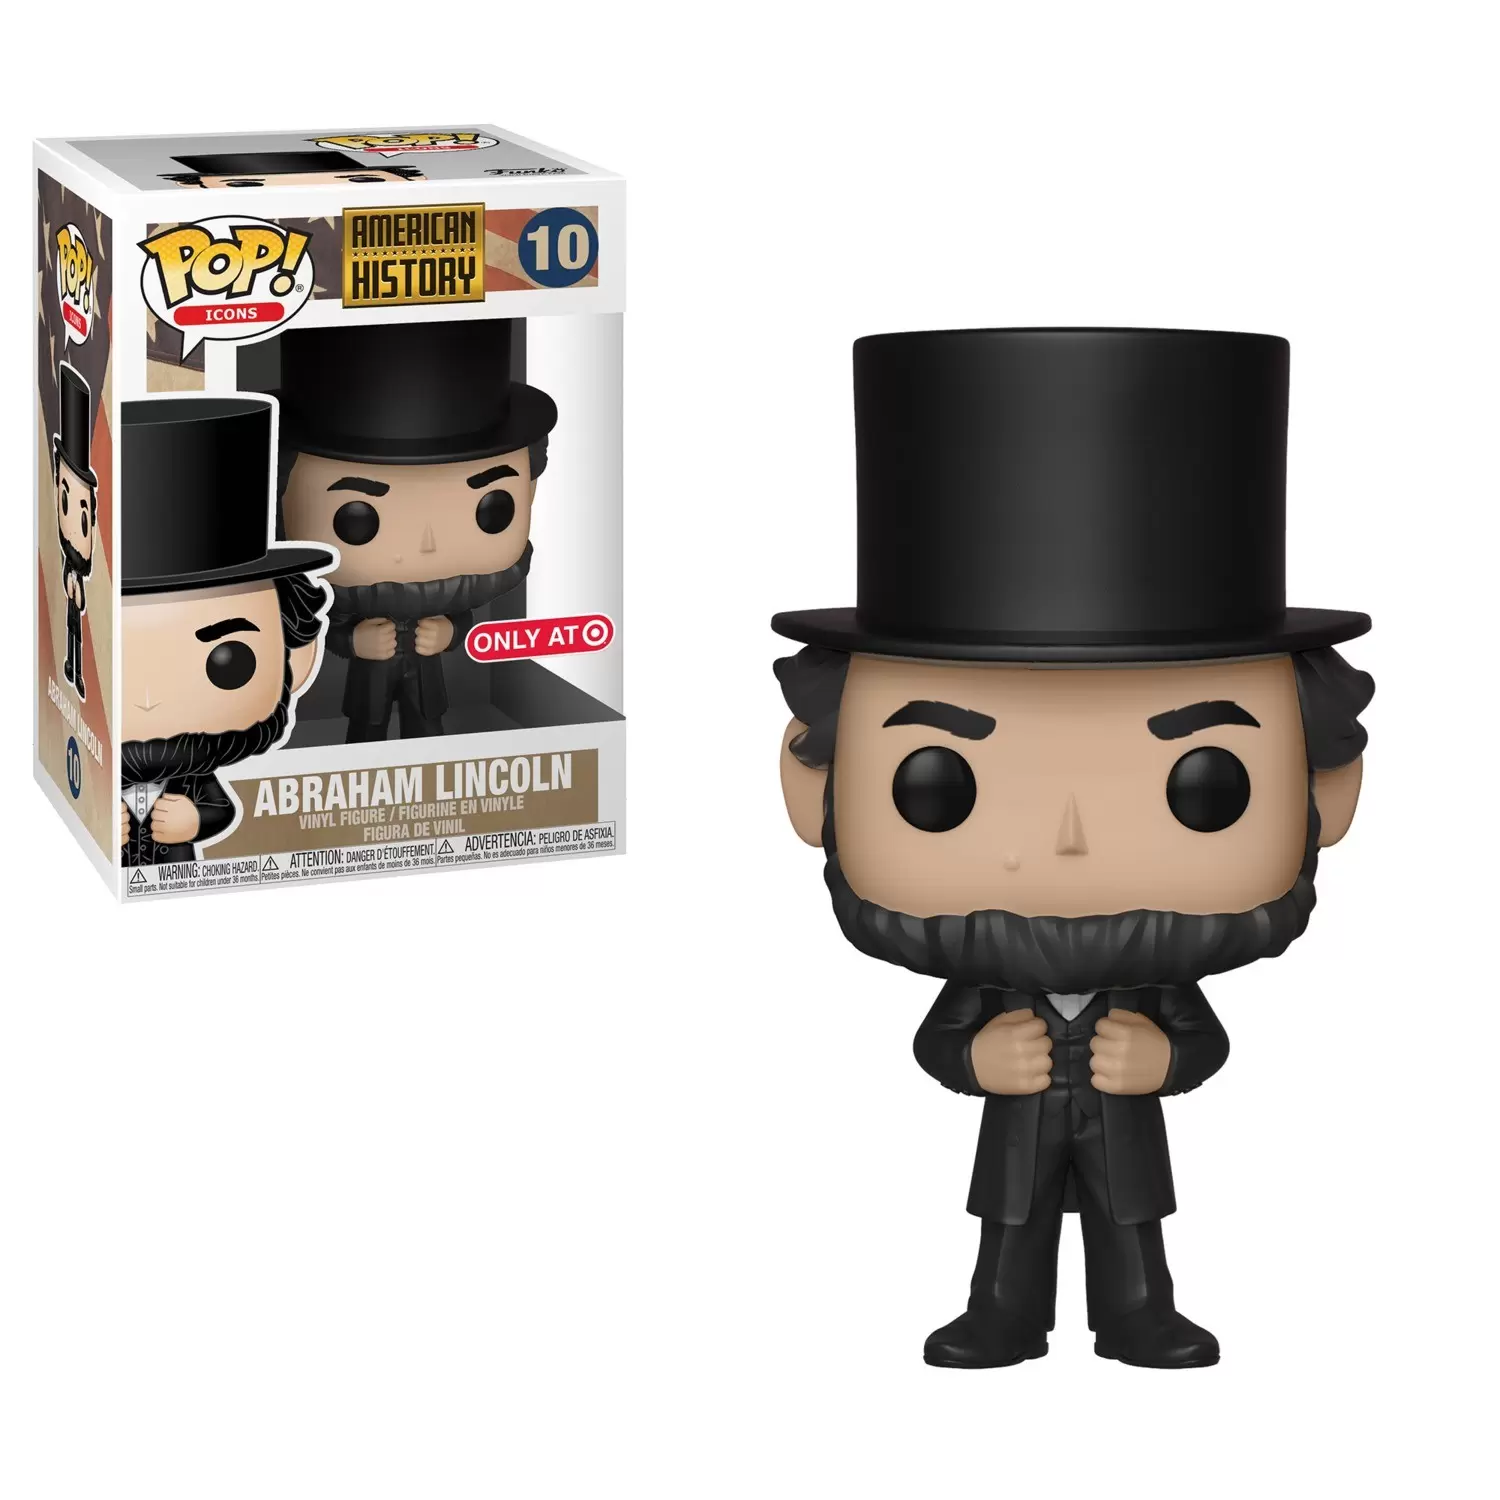 POP! Icons - American History - Abraham Lincoln